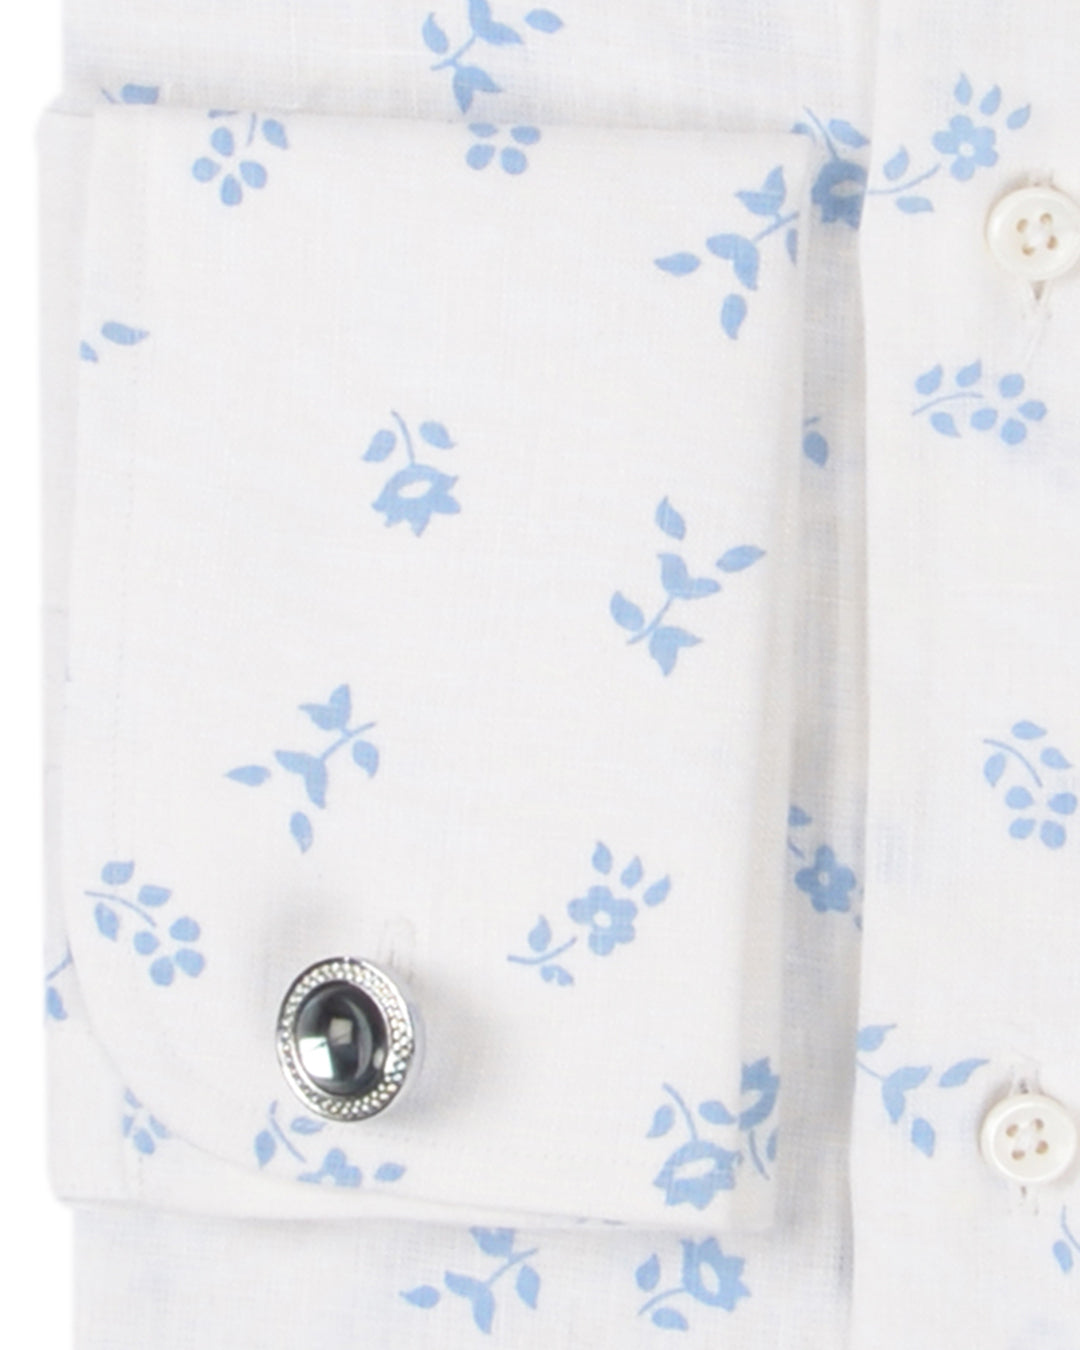 Cuff of custom linen shirt for men in blue printed leaves